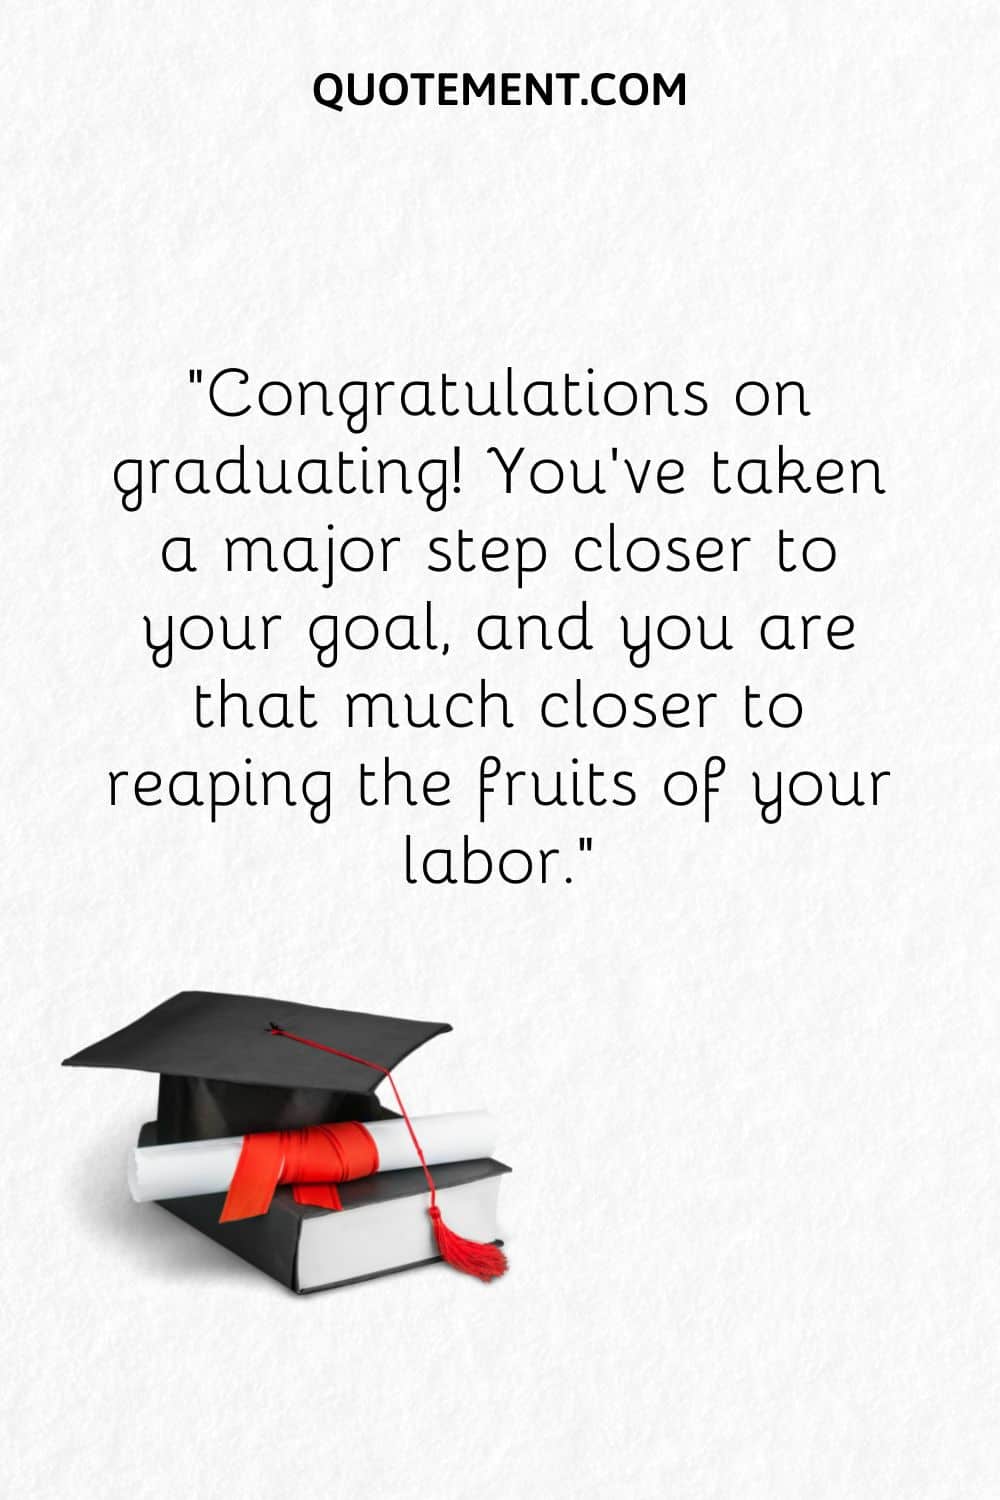 Congratulations on graduating! You've taken a major step closer to your goal, and you are that much closer to reaping the fruits of your labor.